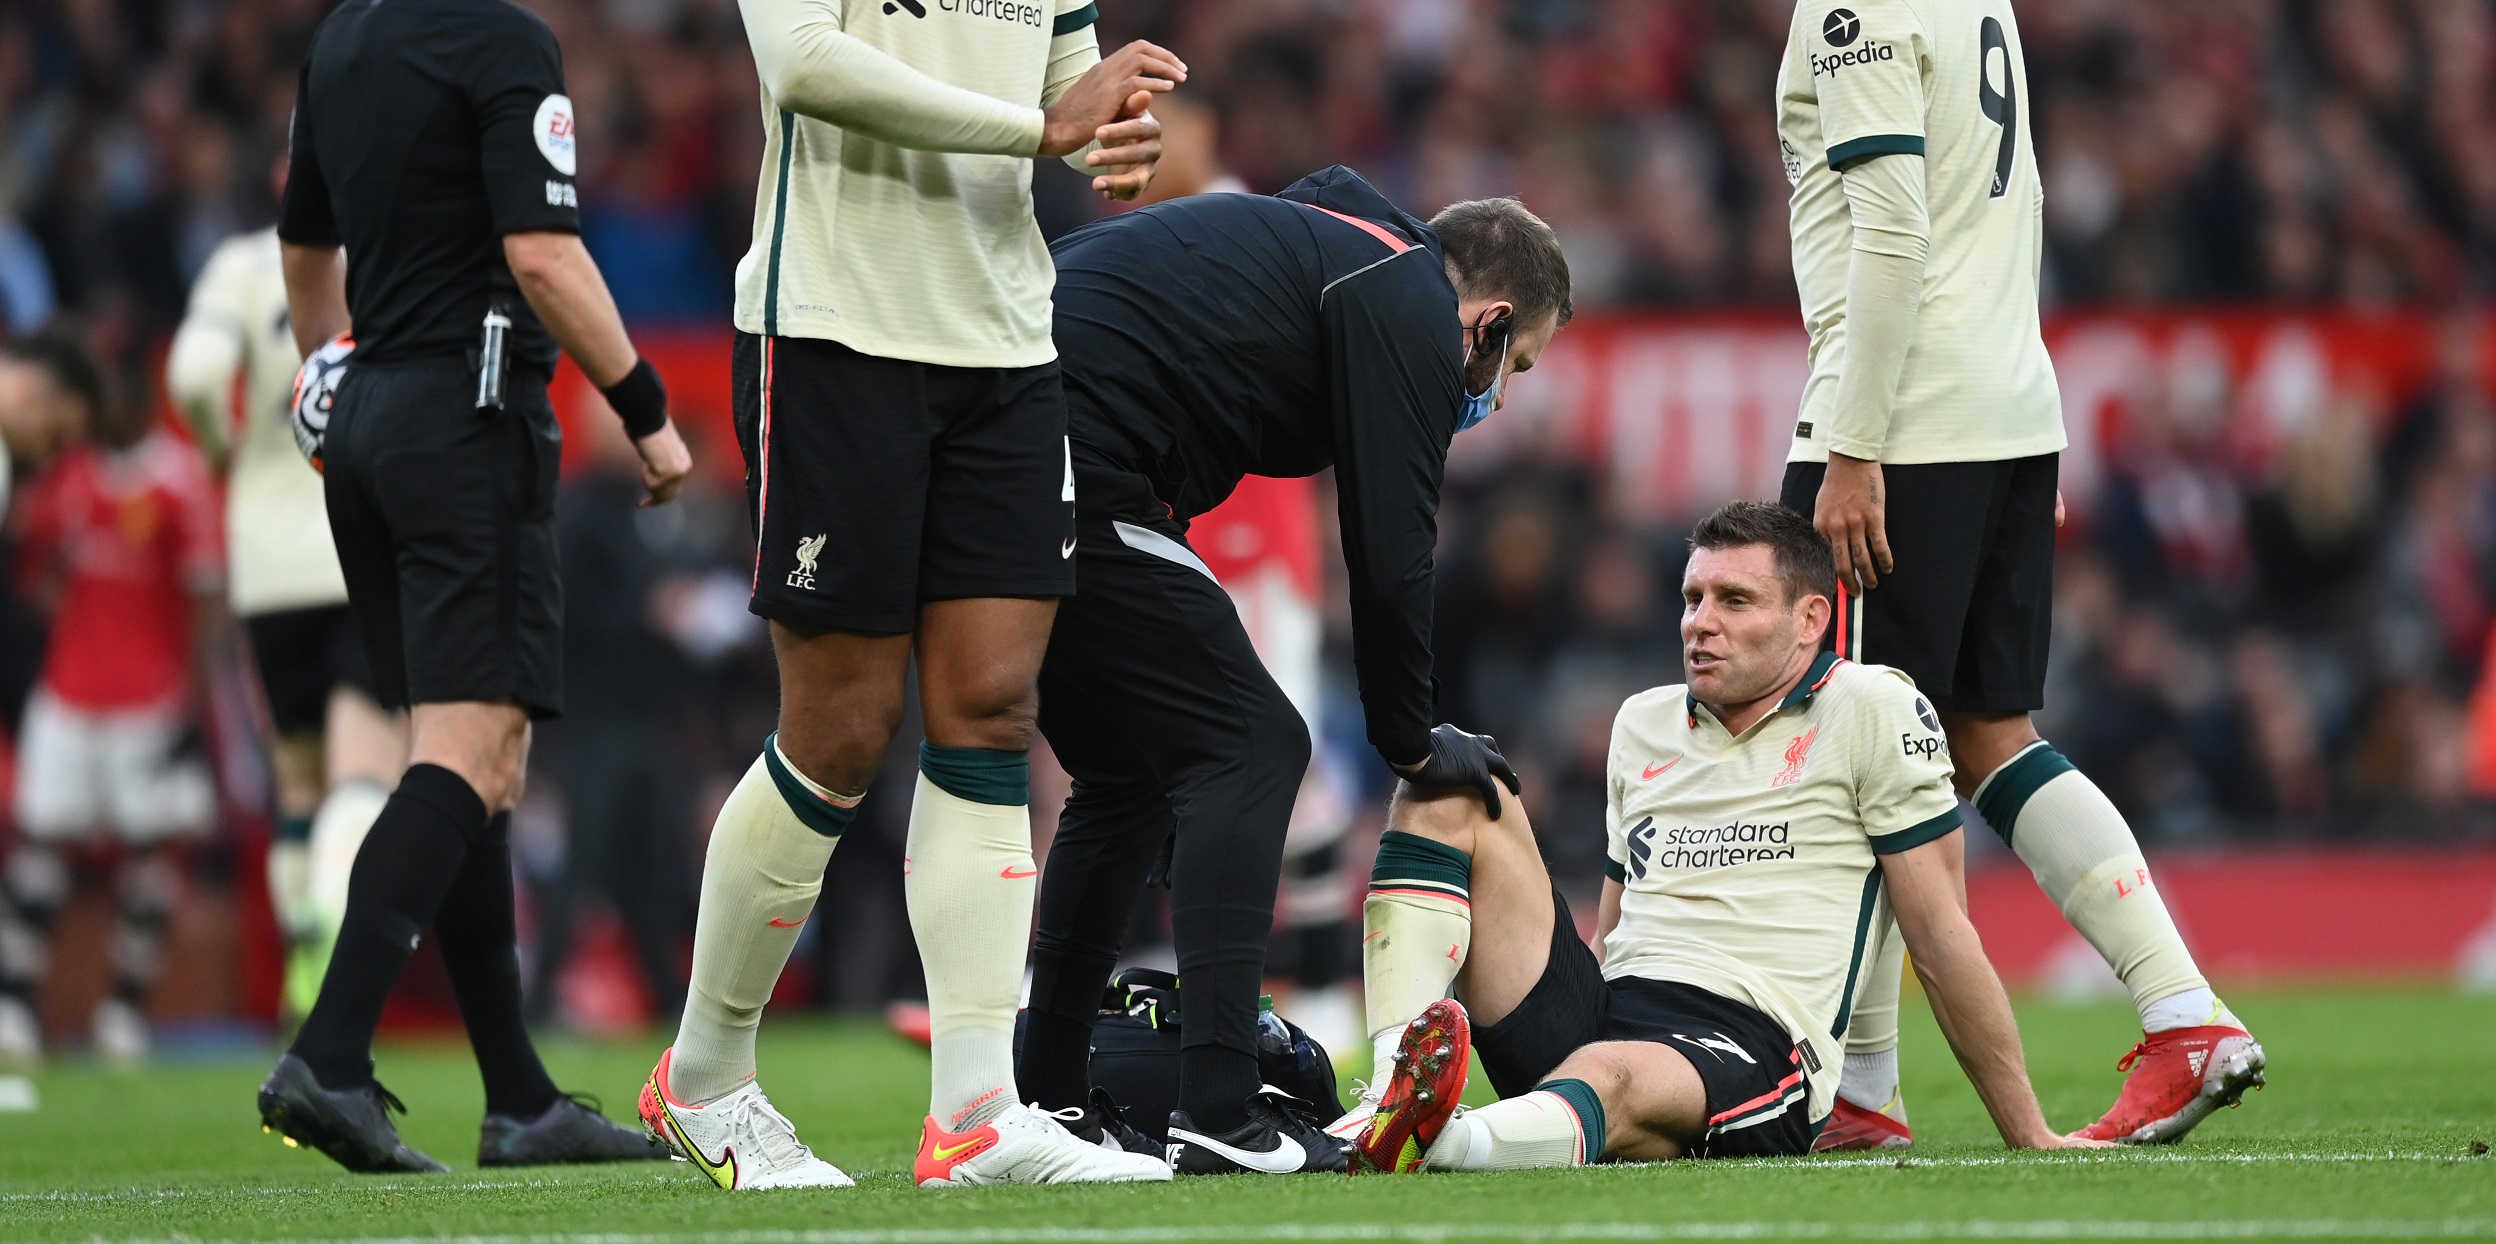 Liverpool injury list grows as James Milner subbed off early in Manchester